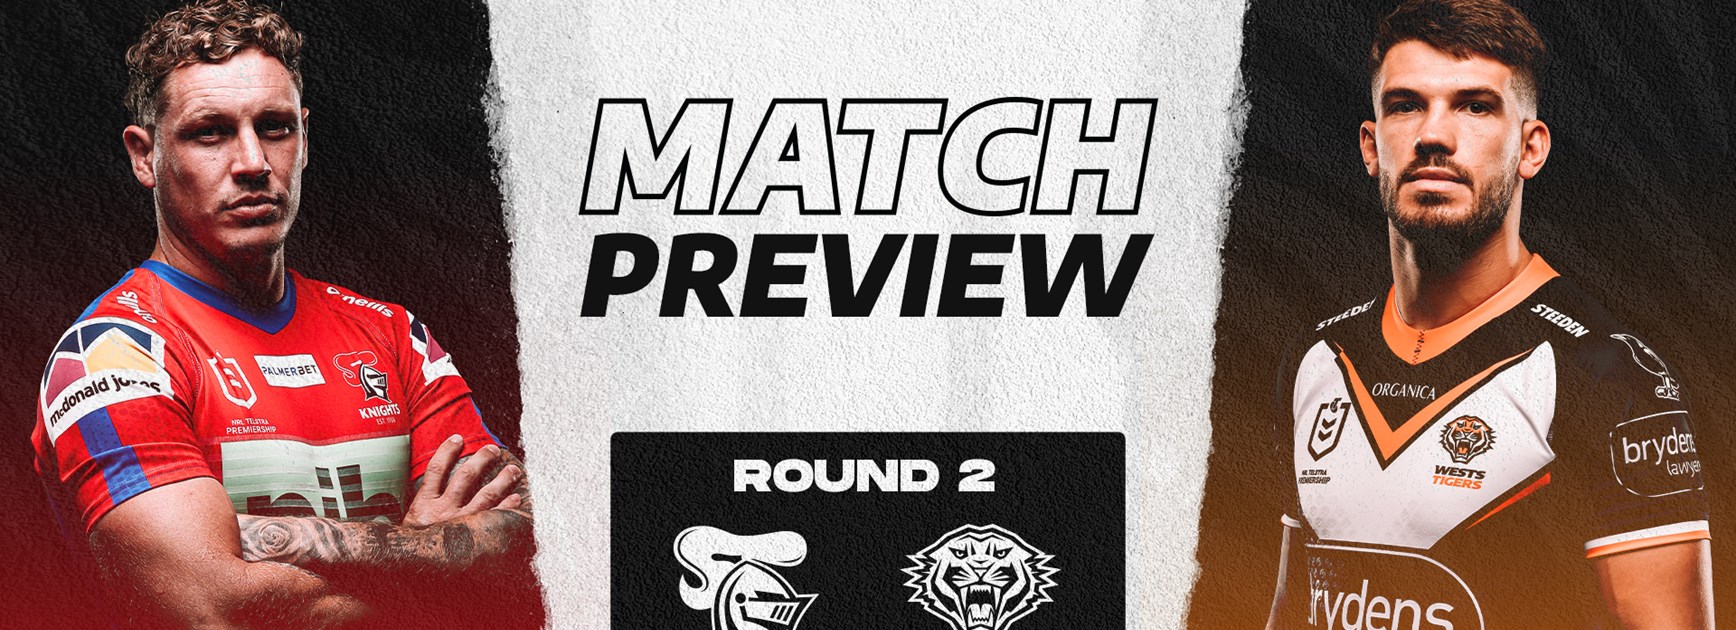 Match Preview: Knights vs Wests Tigers